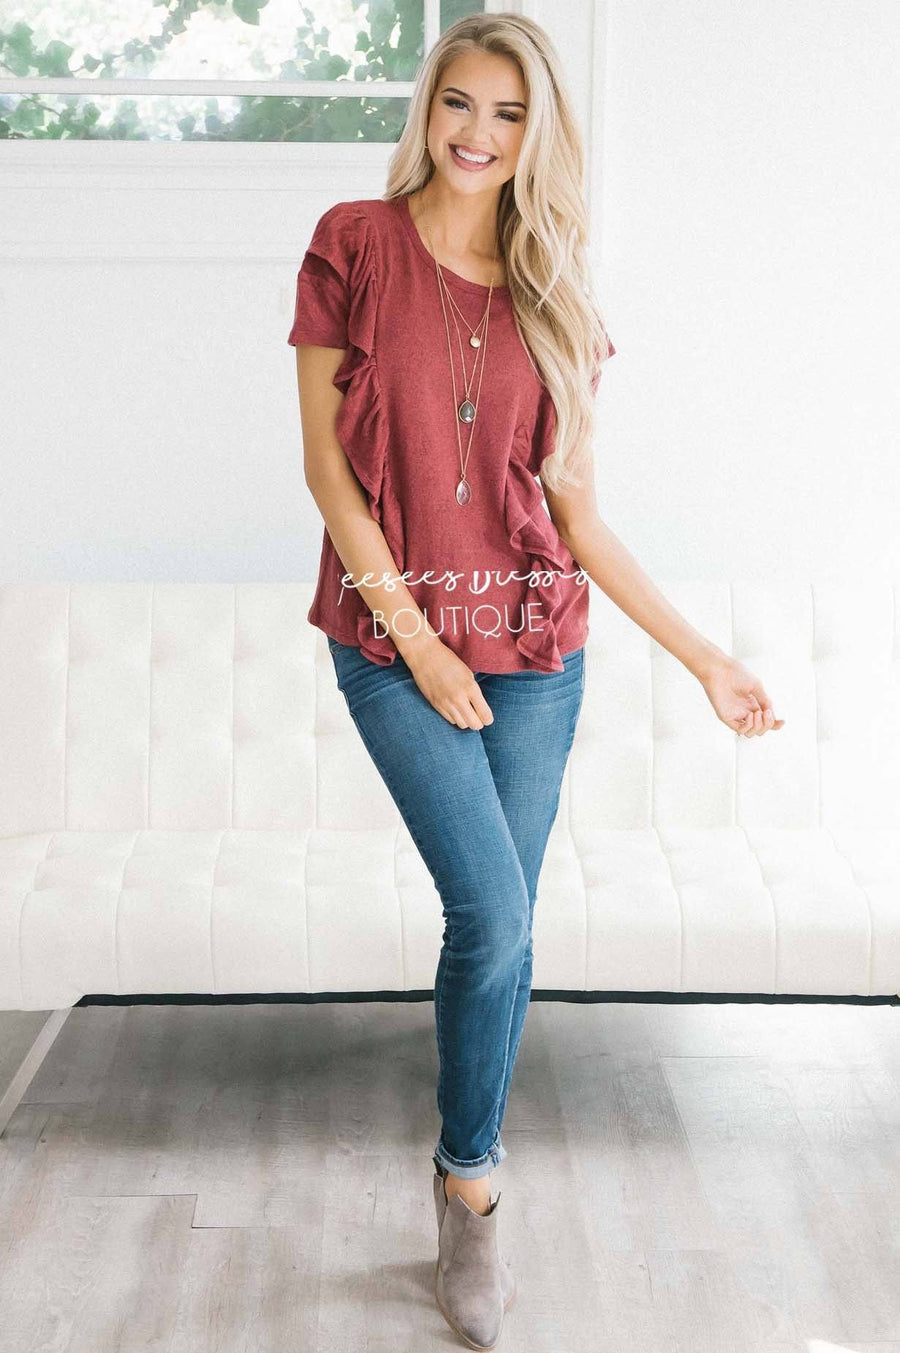 Side Ruffle Cozy Fall Top Tops vendor-unknown 